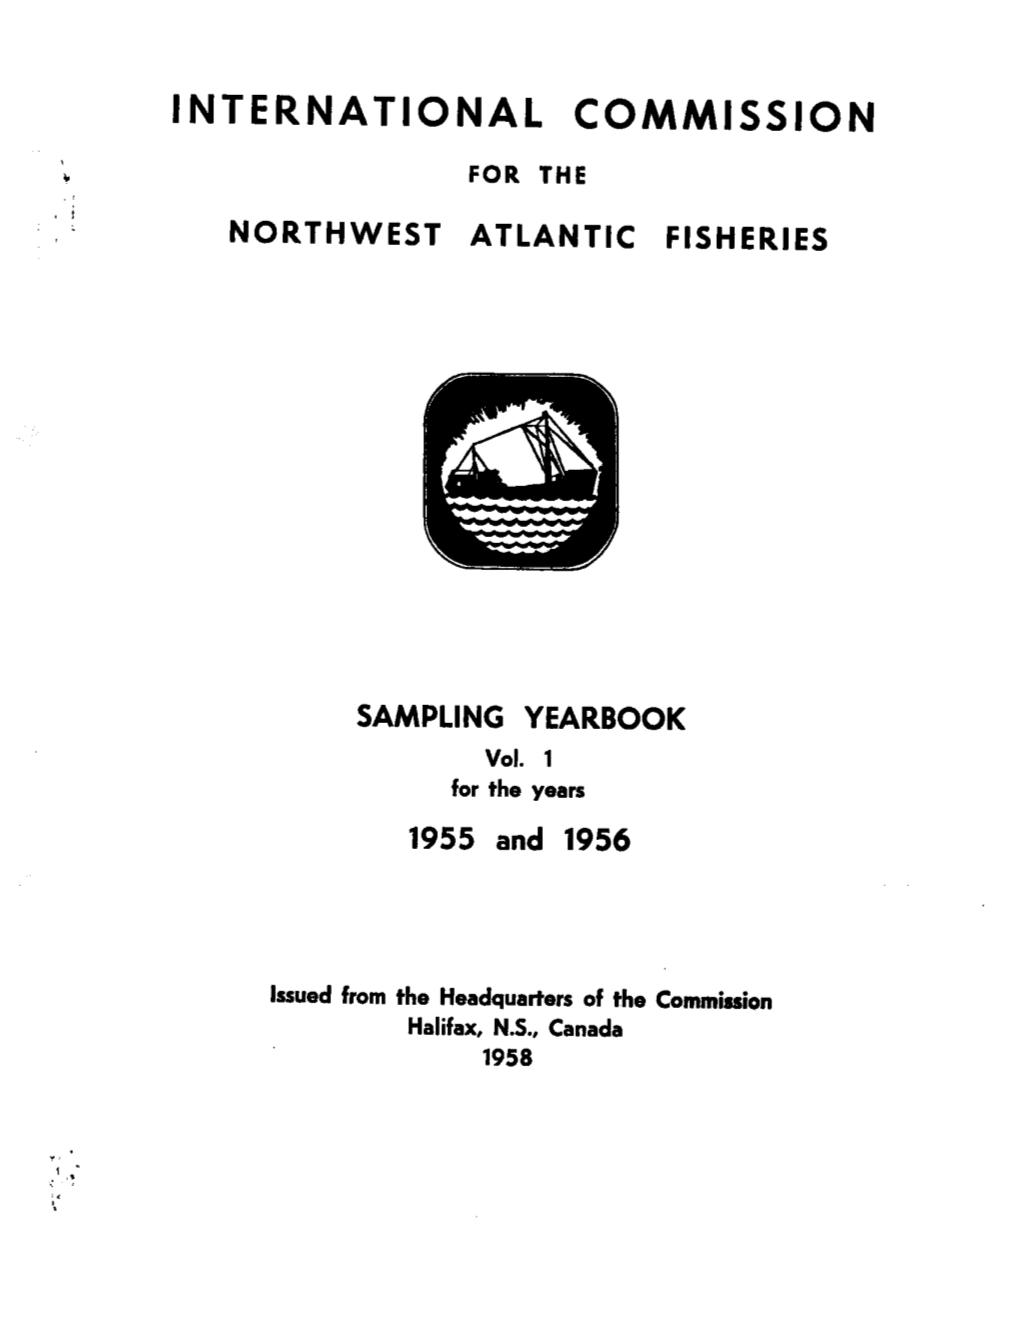 SAMPLING YEARBOOK Vol. 1 for the Years 1955 and 1956